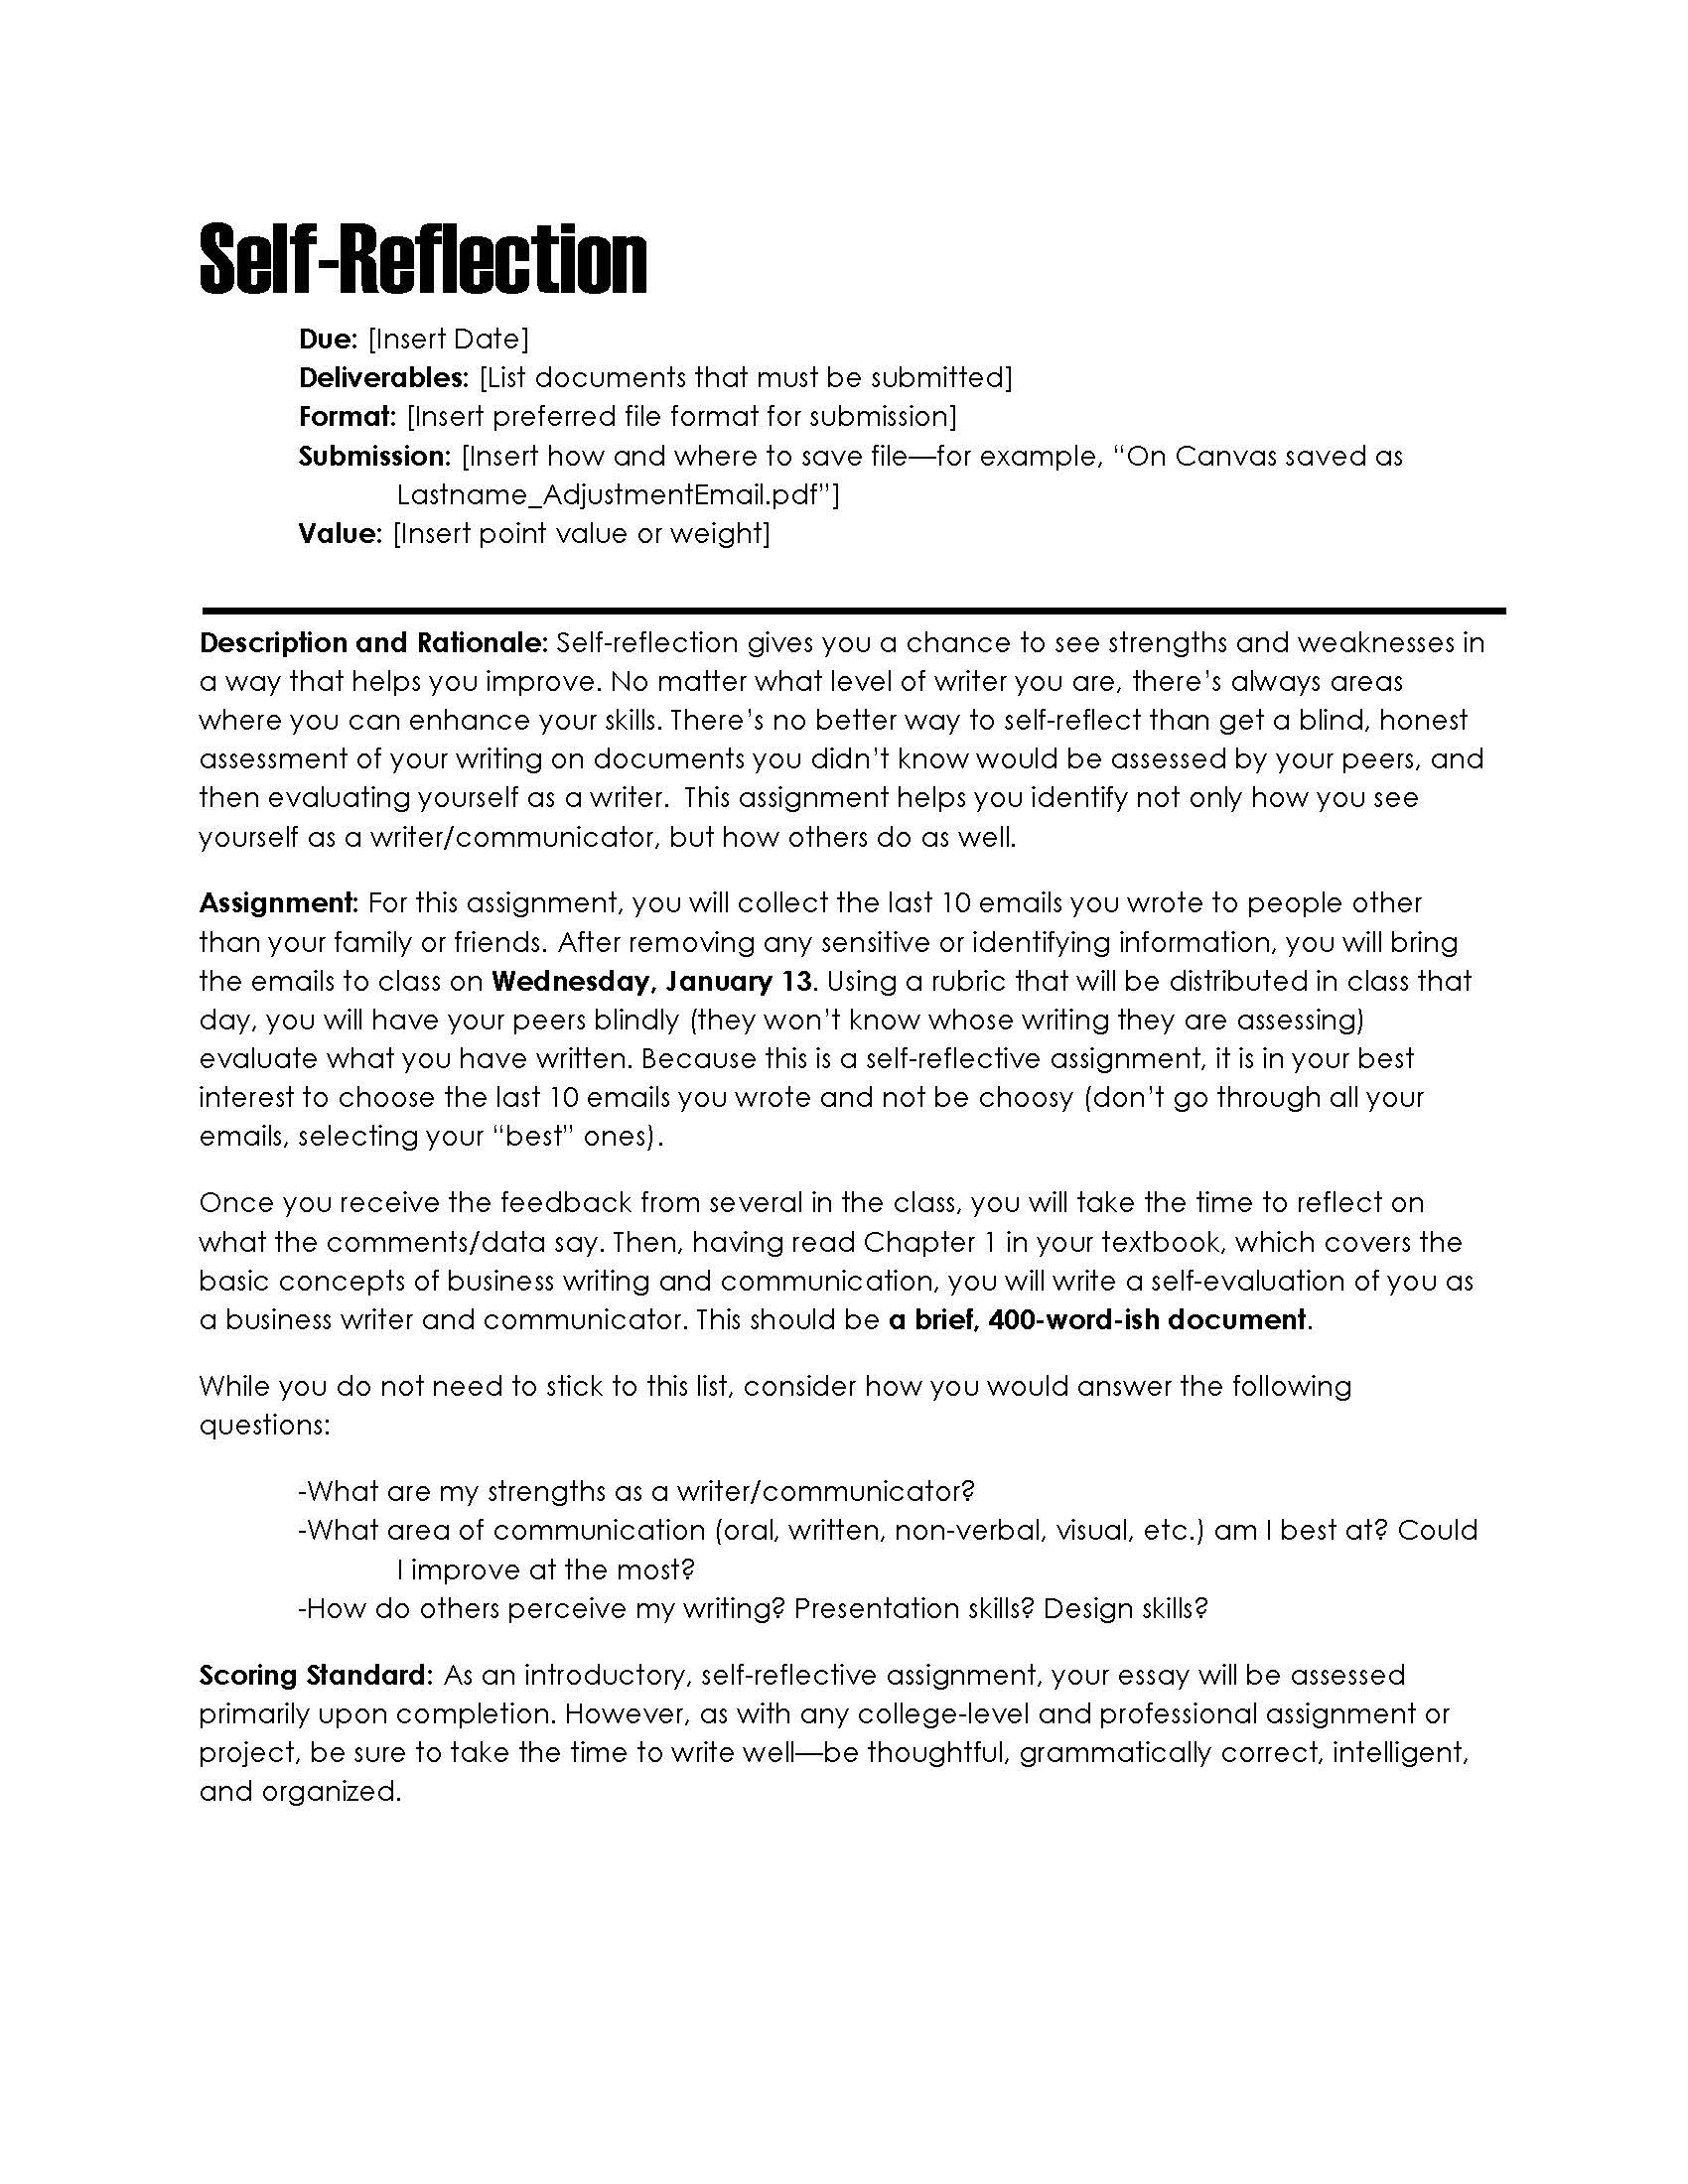 examples of self reflection essays